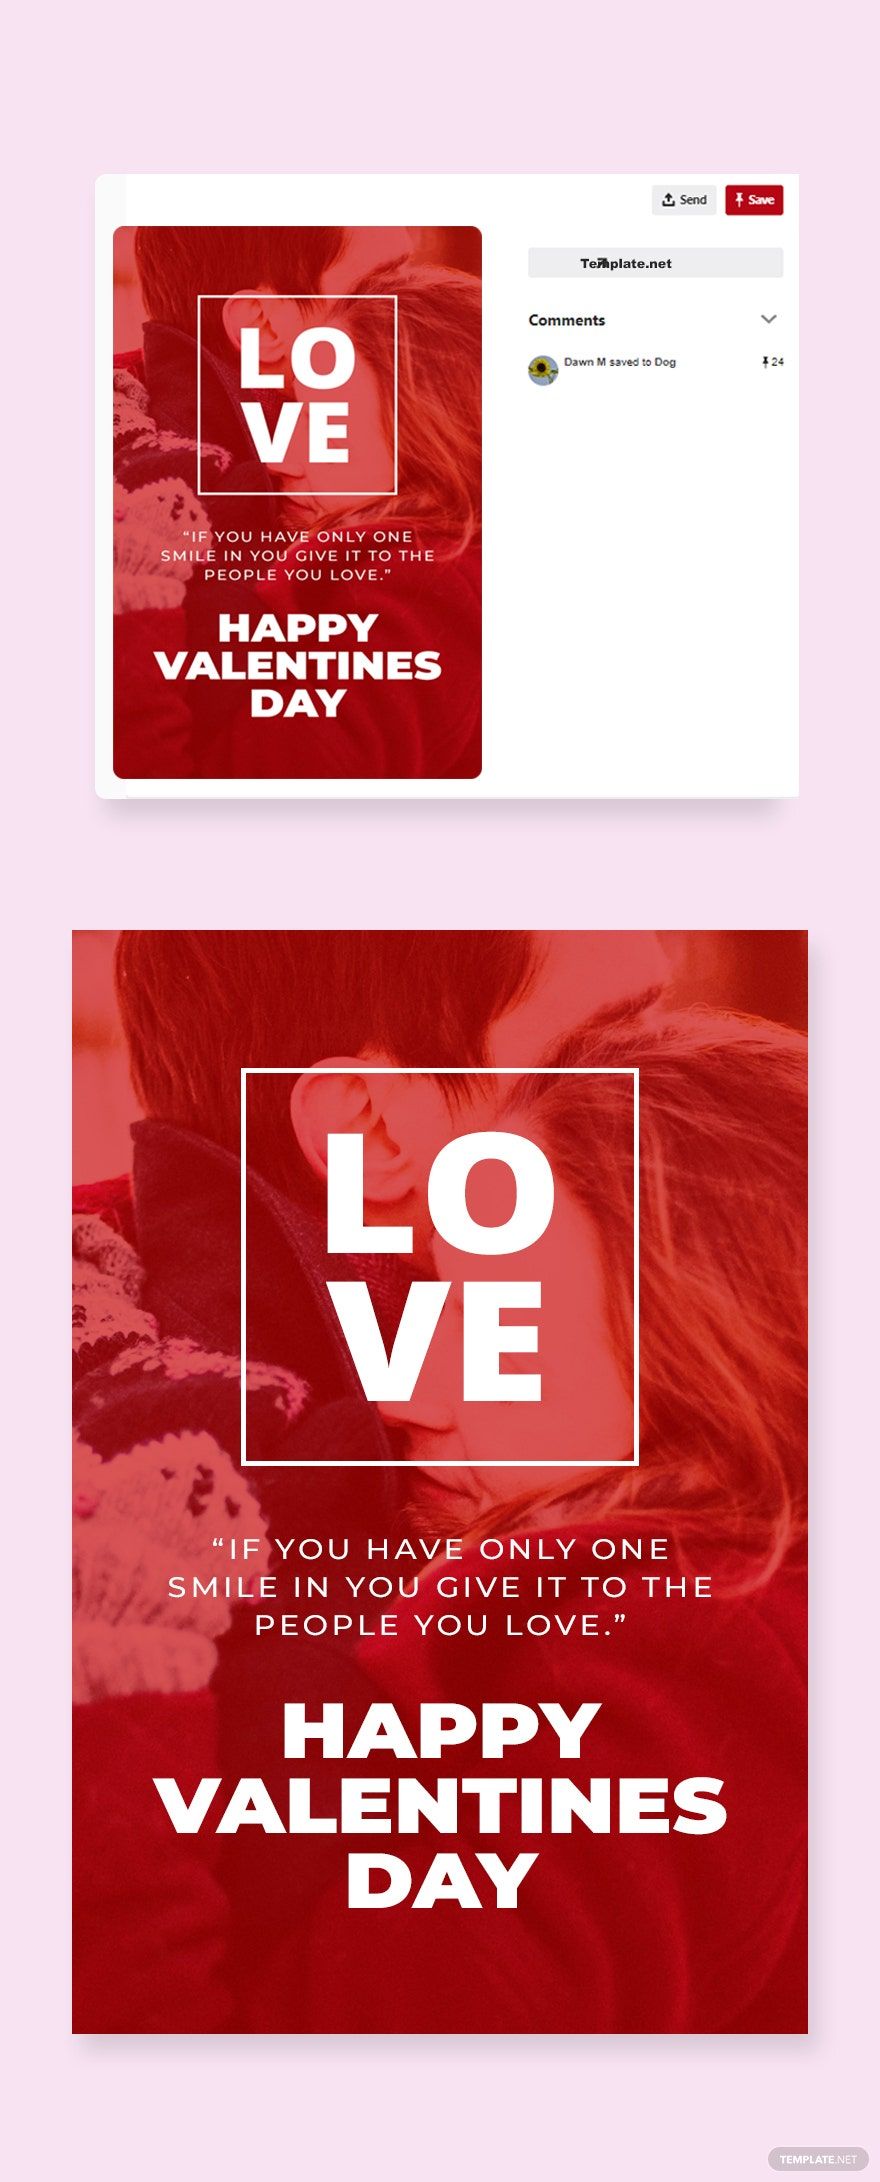 Free valentines day pinterest pin Template in PSD